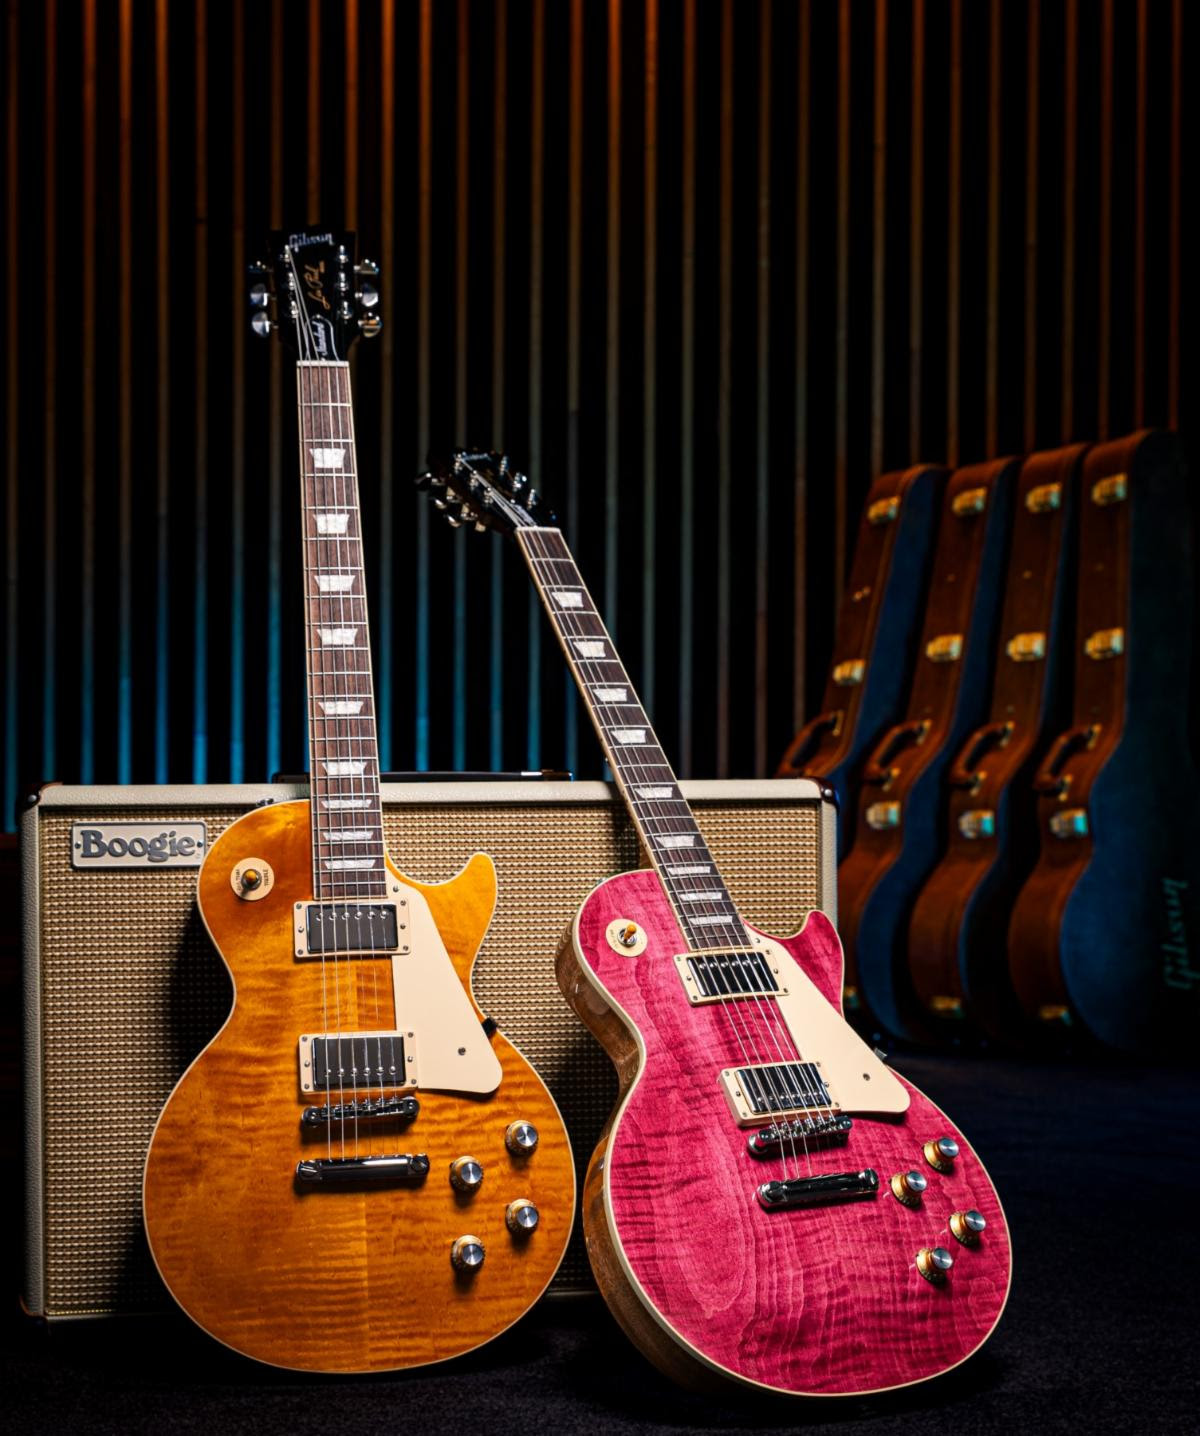 Gibson Les Paul Standard 60s Figured Top in Honey Amber and Translucent Fuchsia.